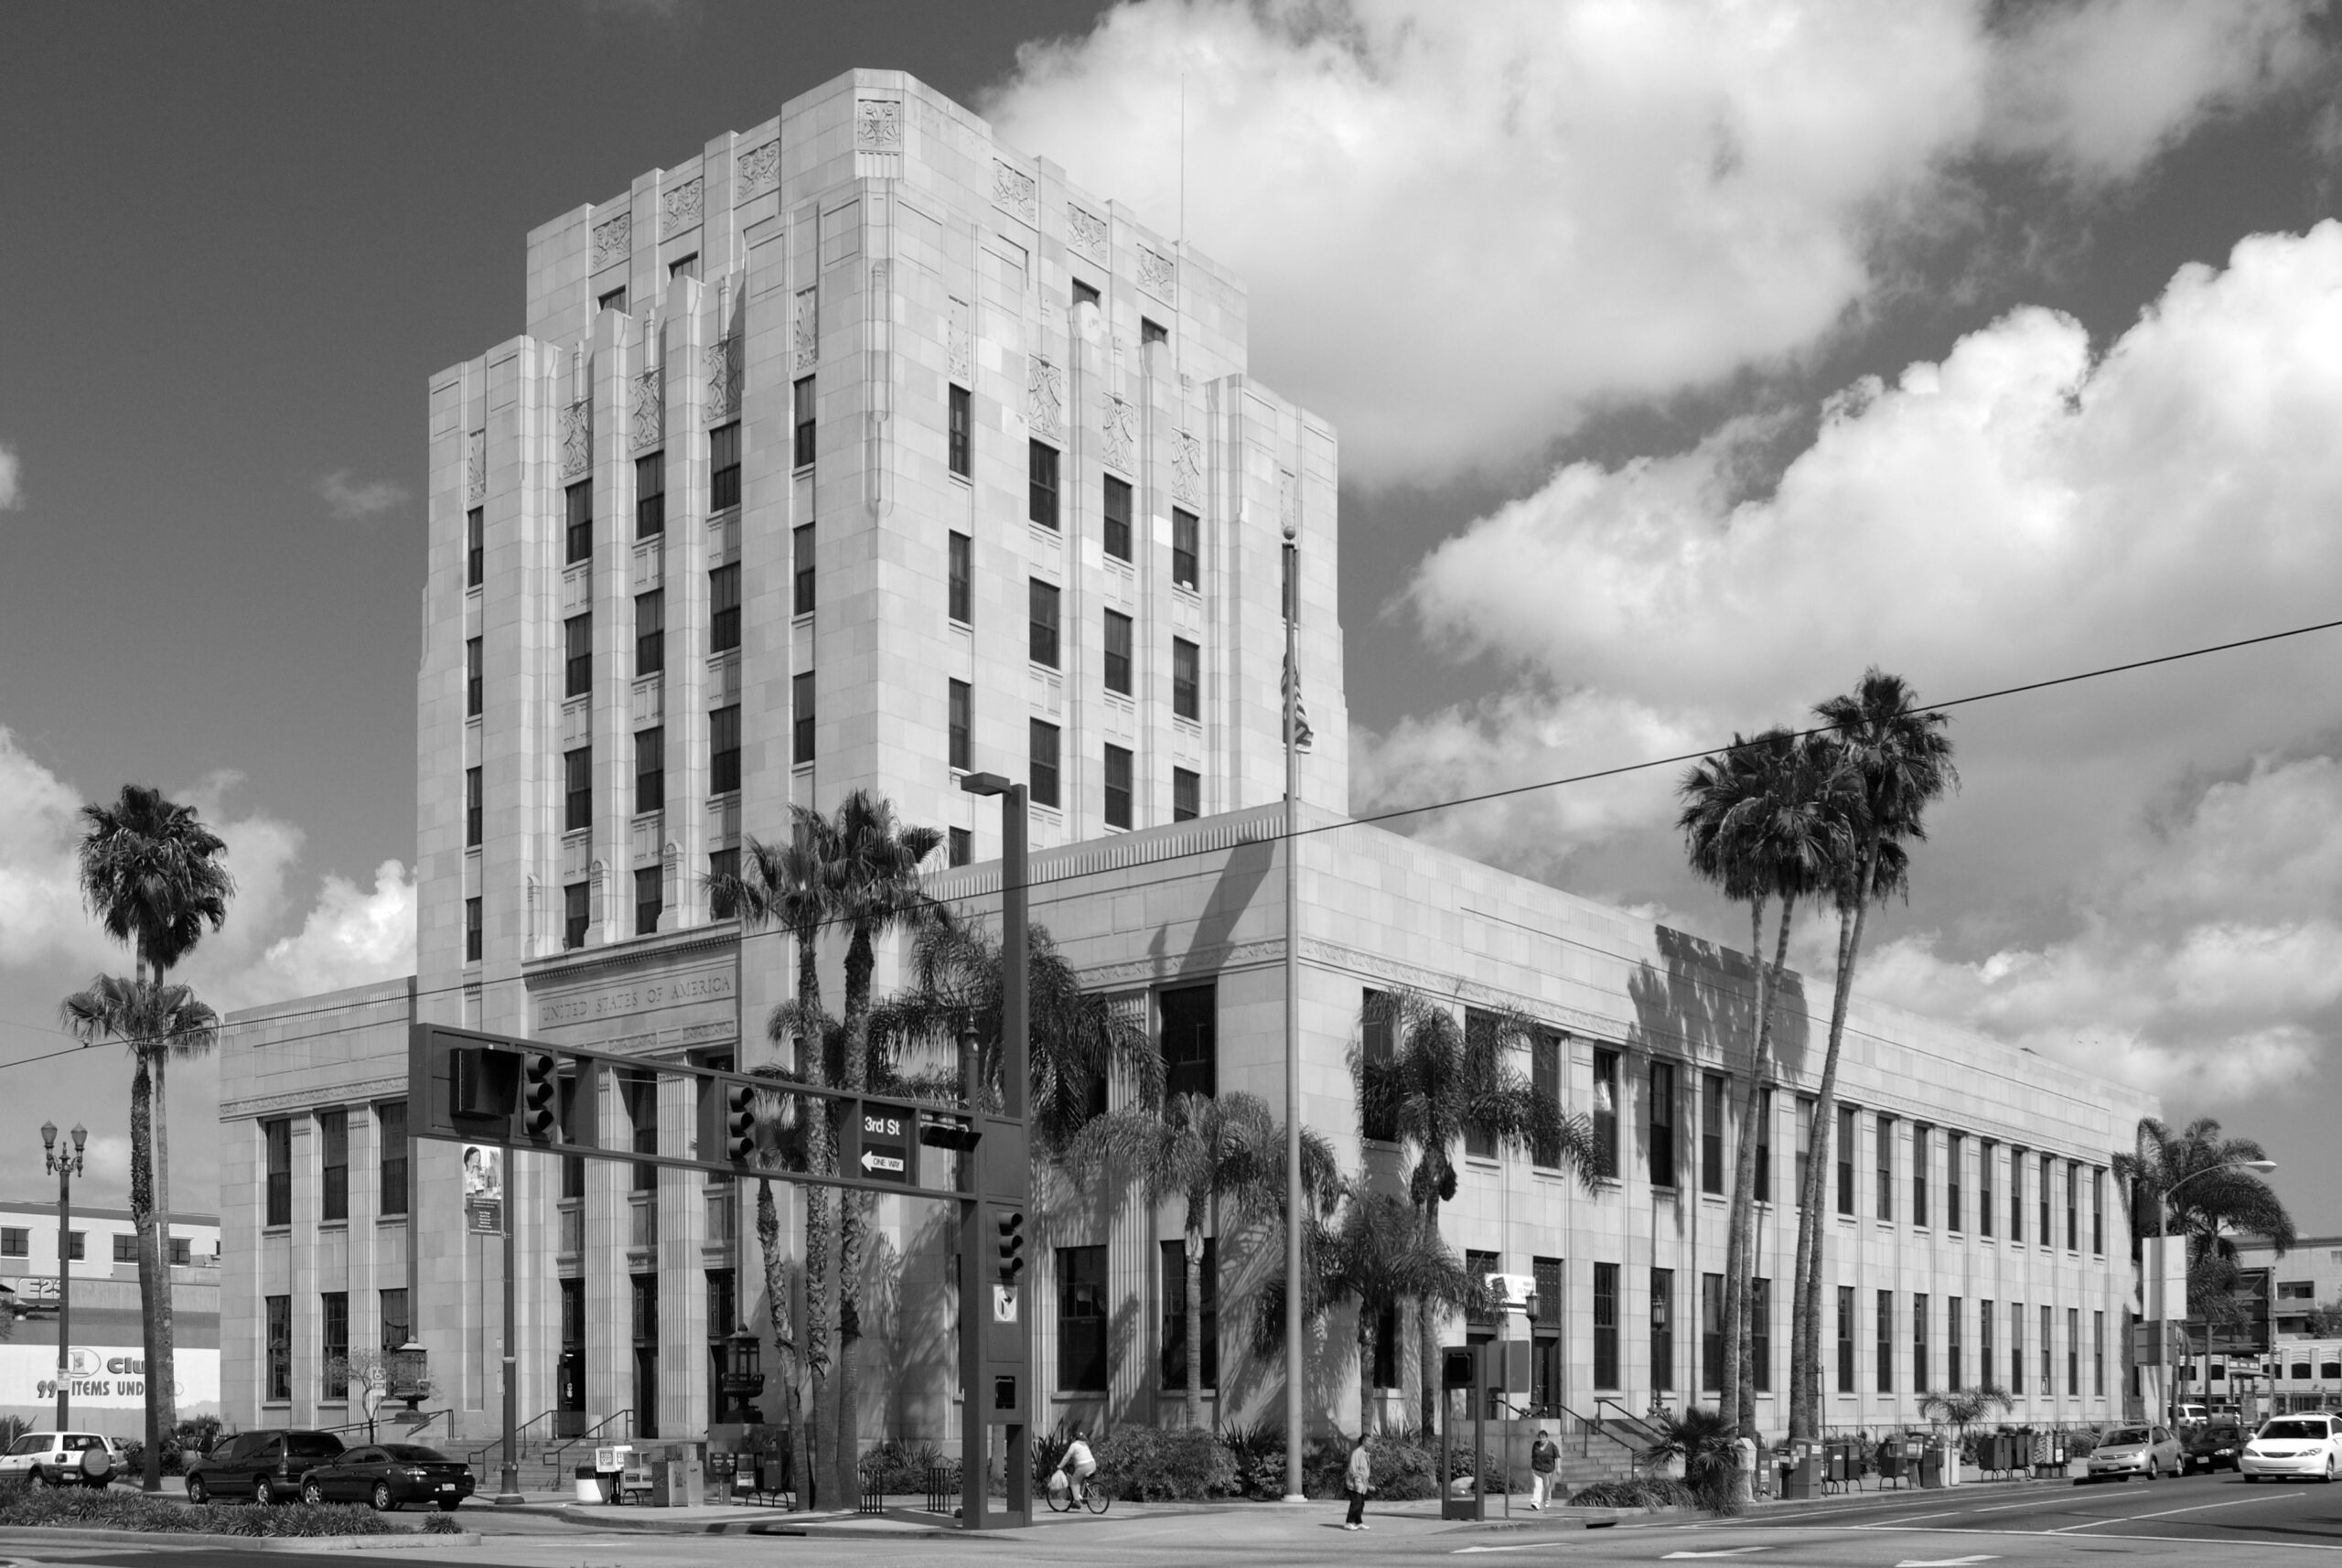 The History of the Long Beach Post Office